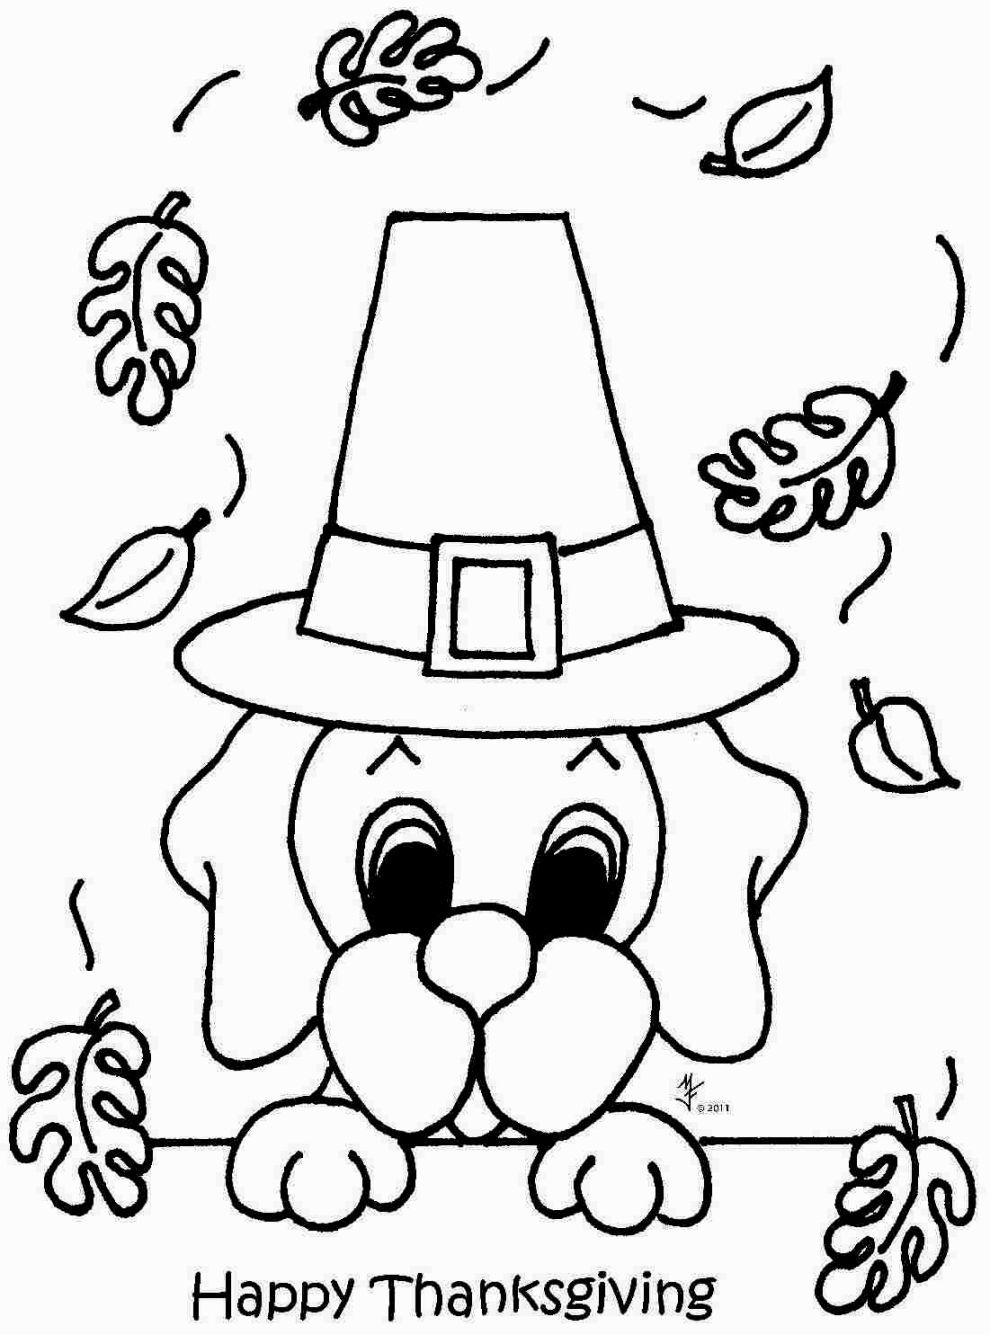 Pilgrim Coloring Pages Turkey With Pilgrim Hat Coloring Pages